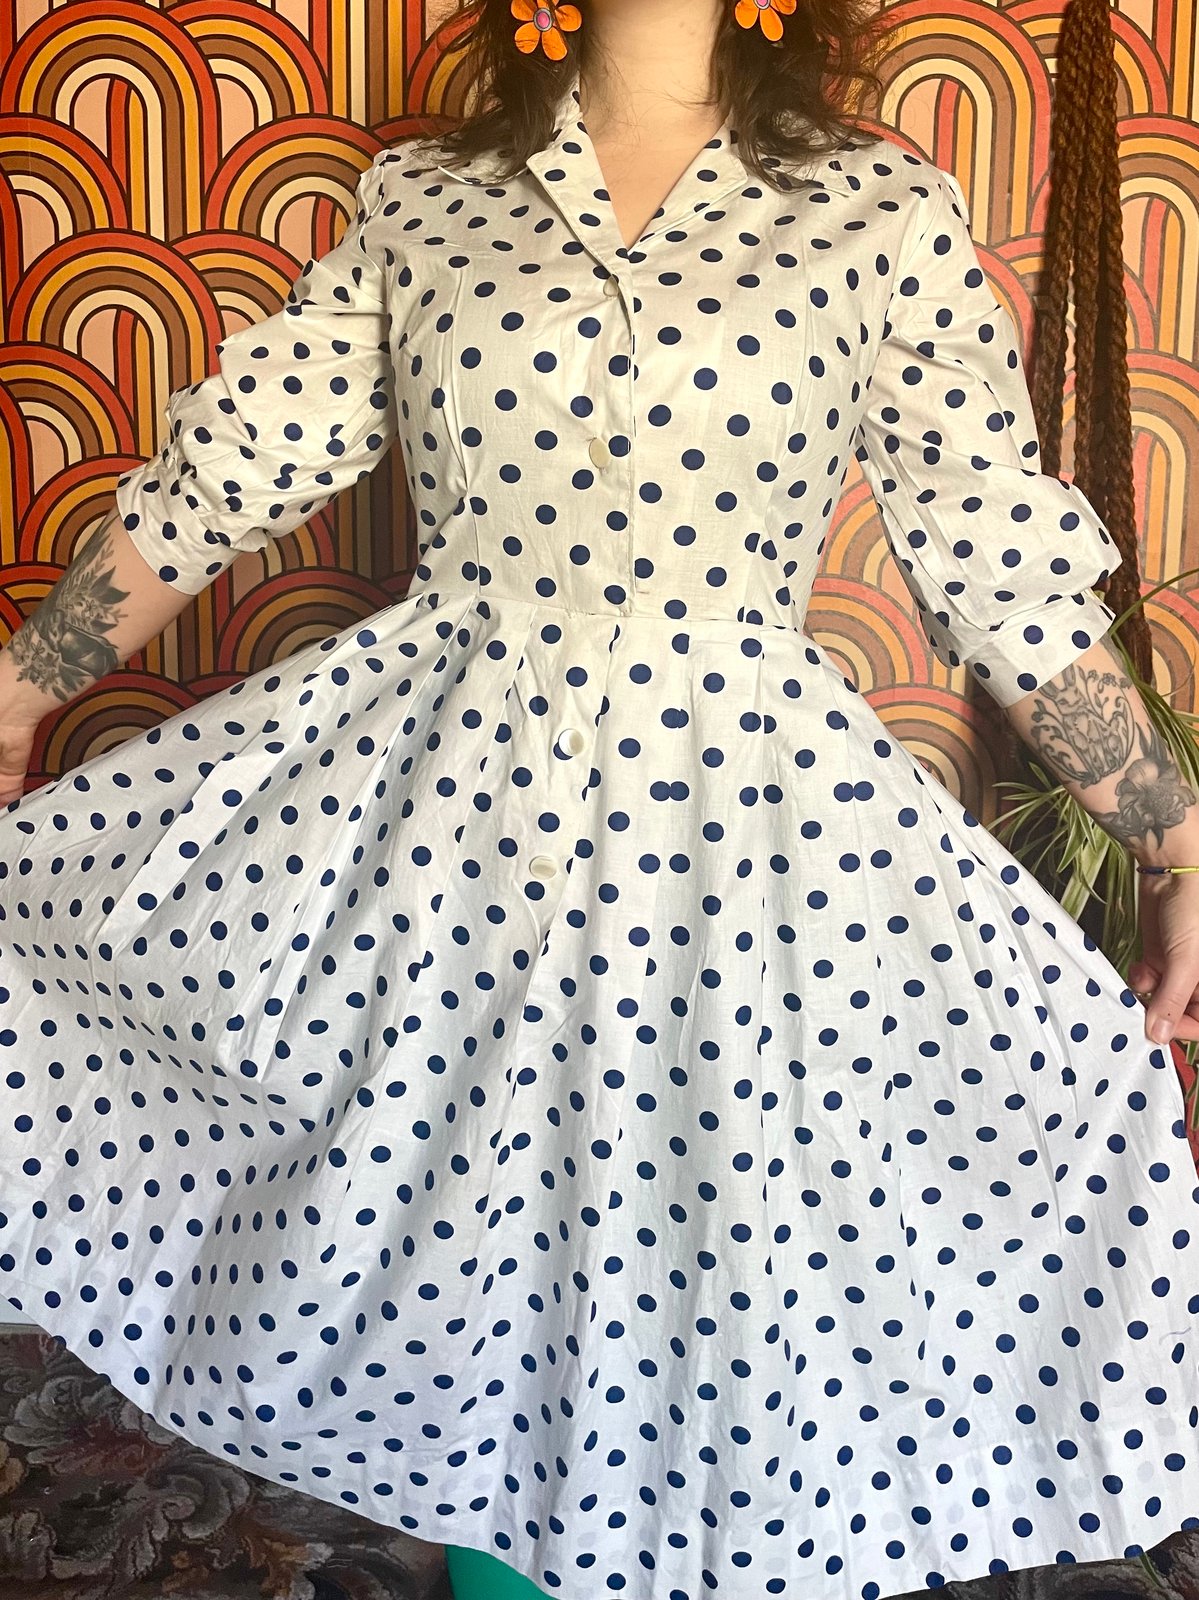 Vintage 50s 60s Polka Dot Cotton Fit and Flare Dress